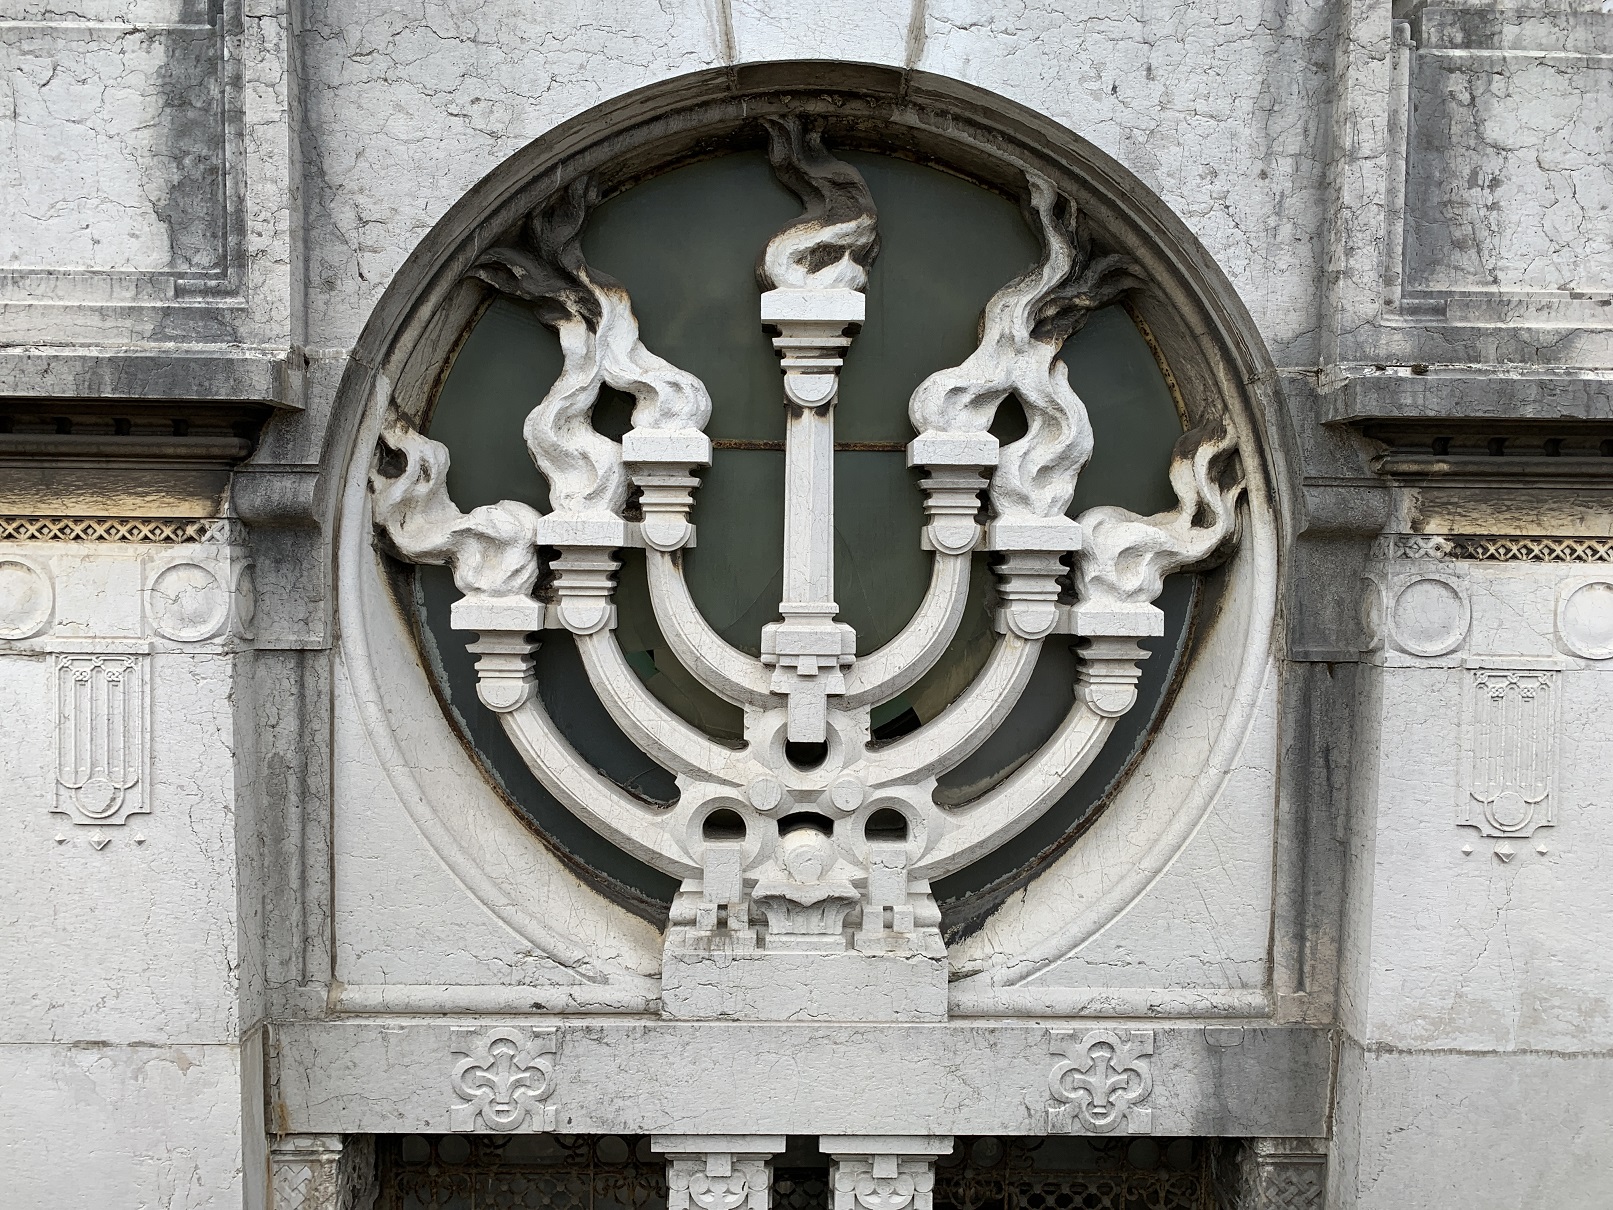 Segre's grave, Jewish Sector of the Monumental Cemetery of Milan